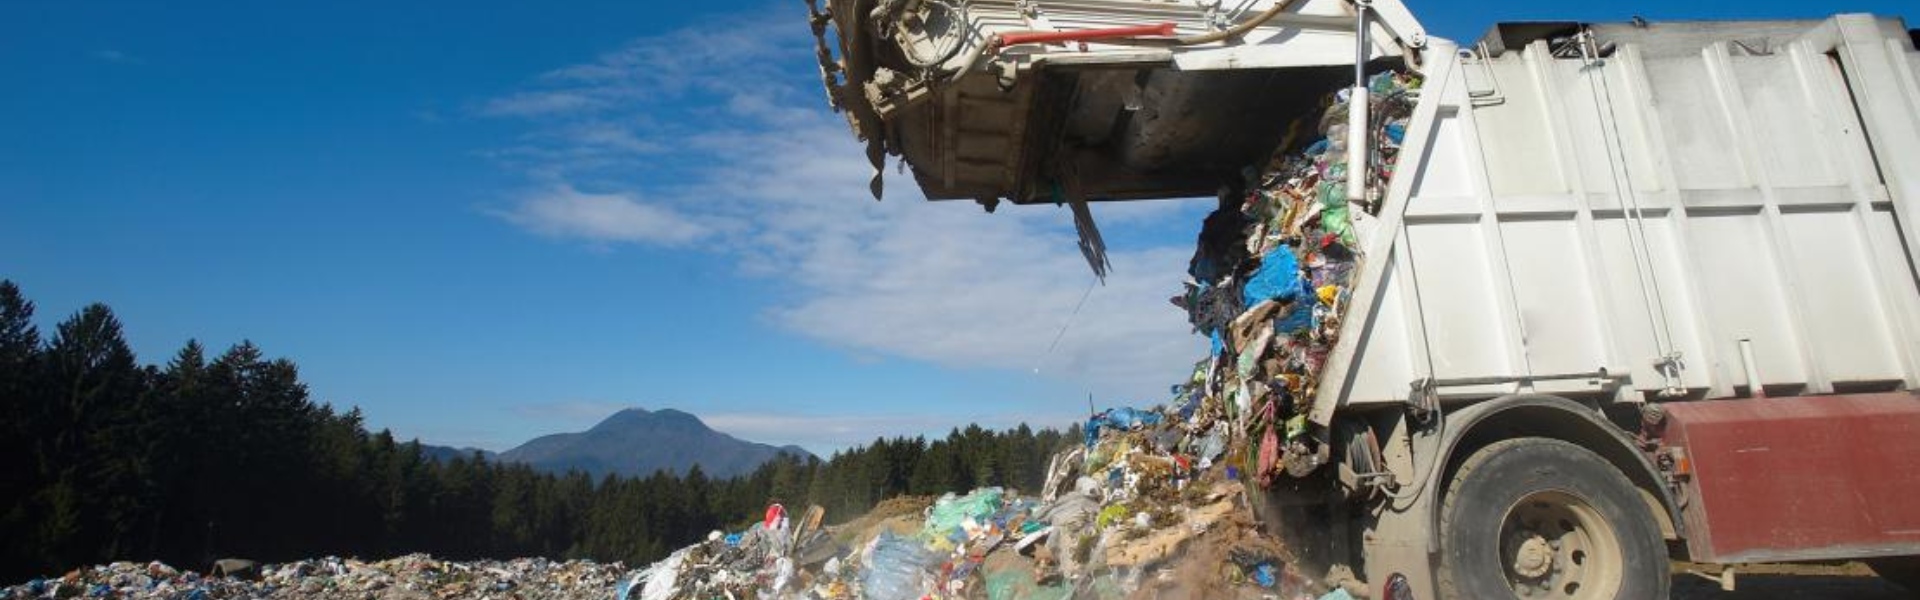 Photo of a garbage truck dumping garbage in a landfill